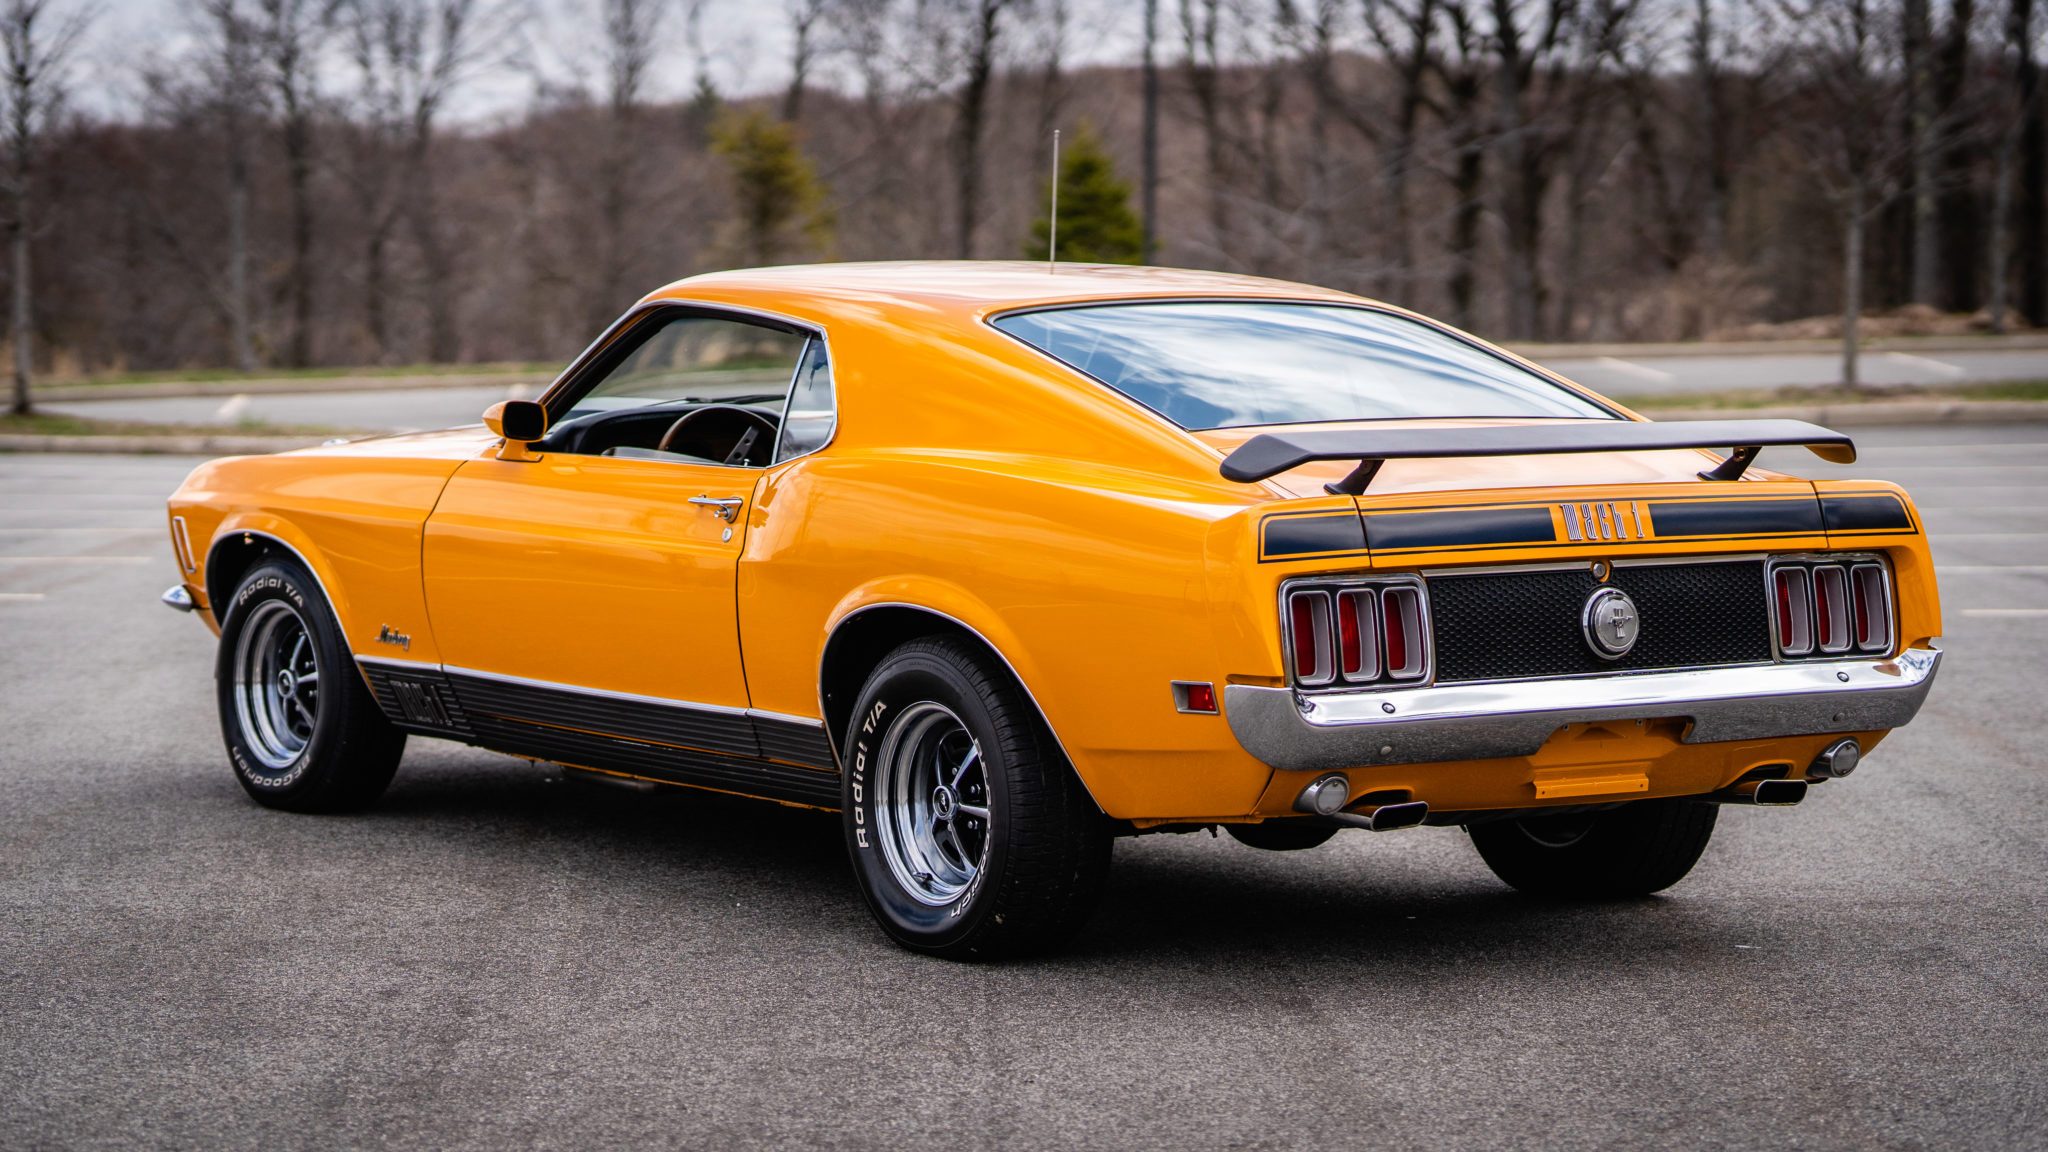 1970 Ford Mustang Mach 1 - Image Abyss